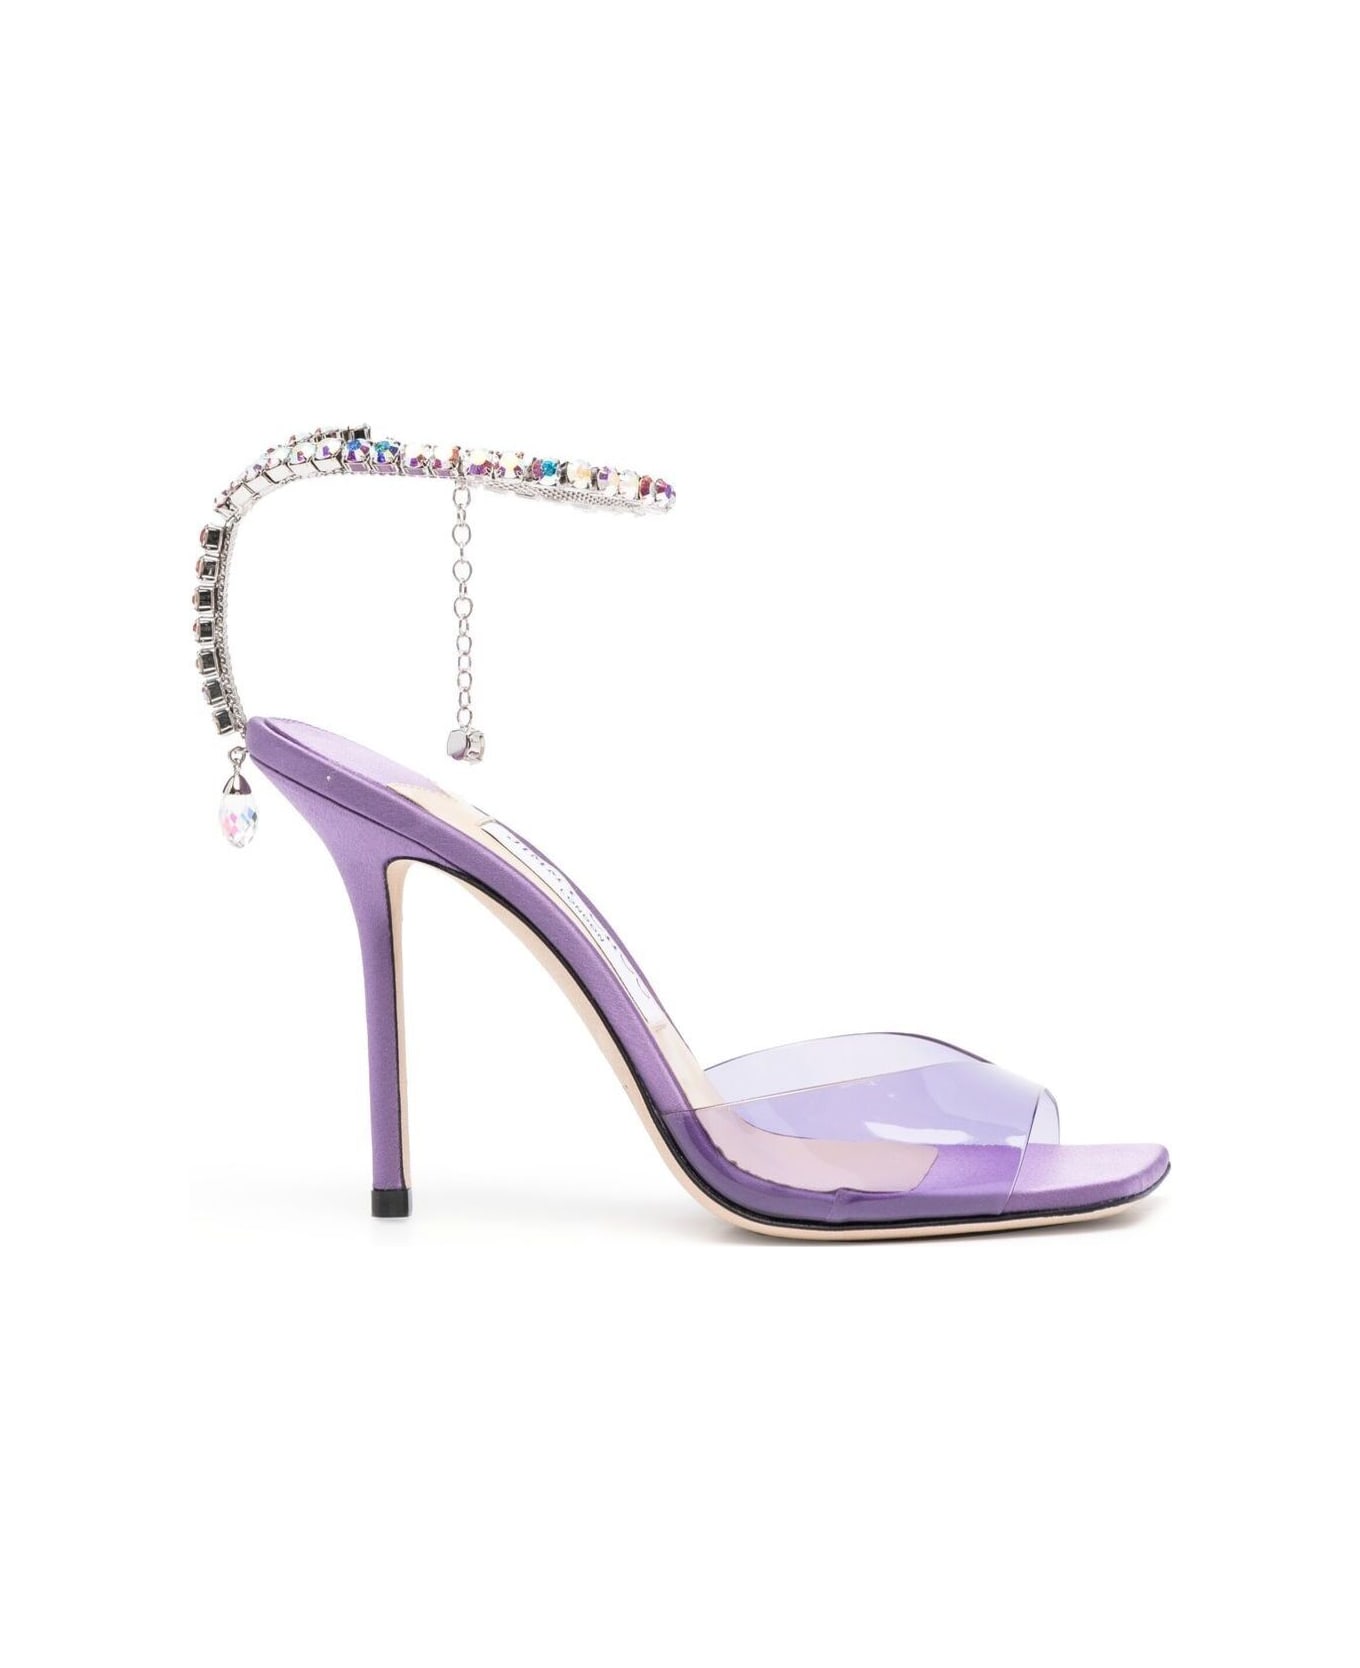 Jimmy Choo Lavander Saeda Sandals With Crystal Embellishment In Leather And Pvc Woman - Violet